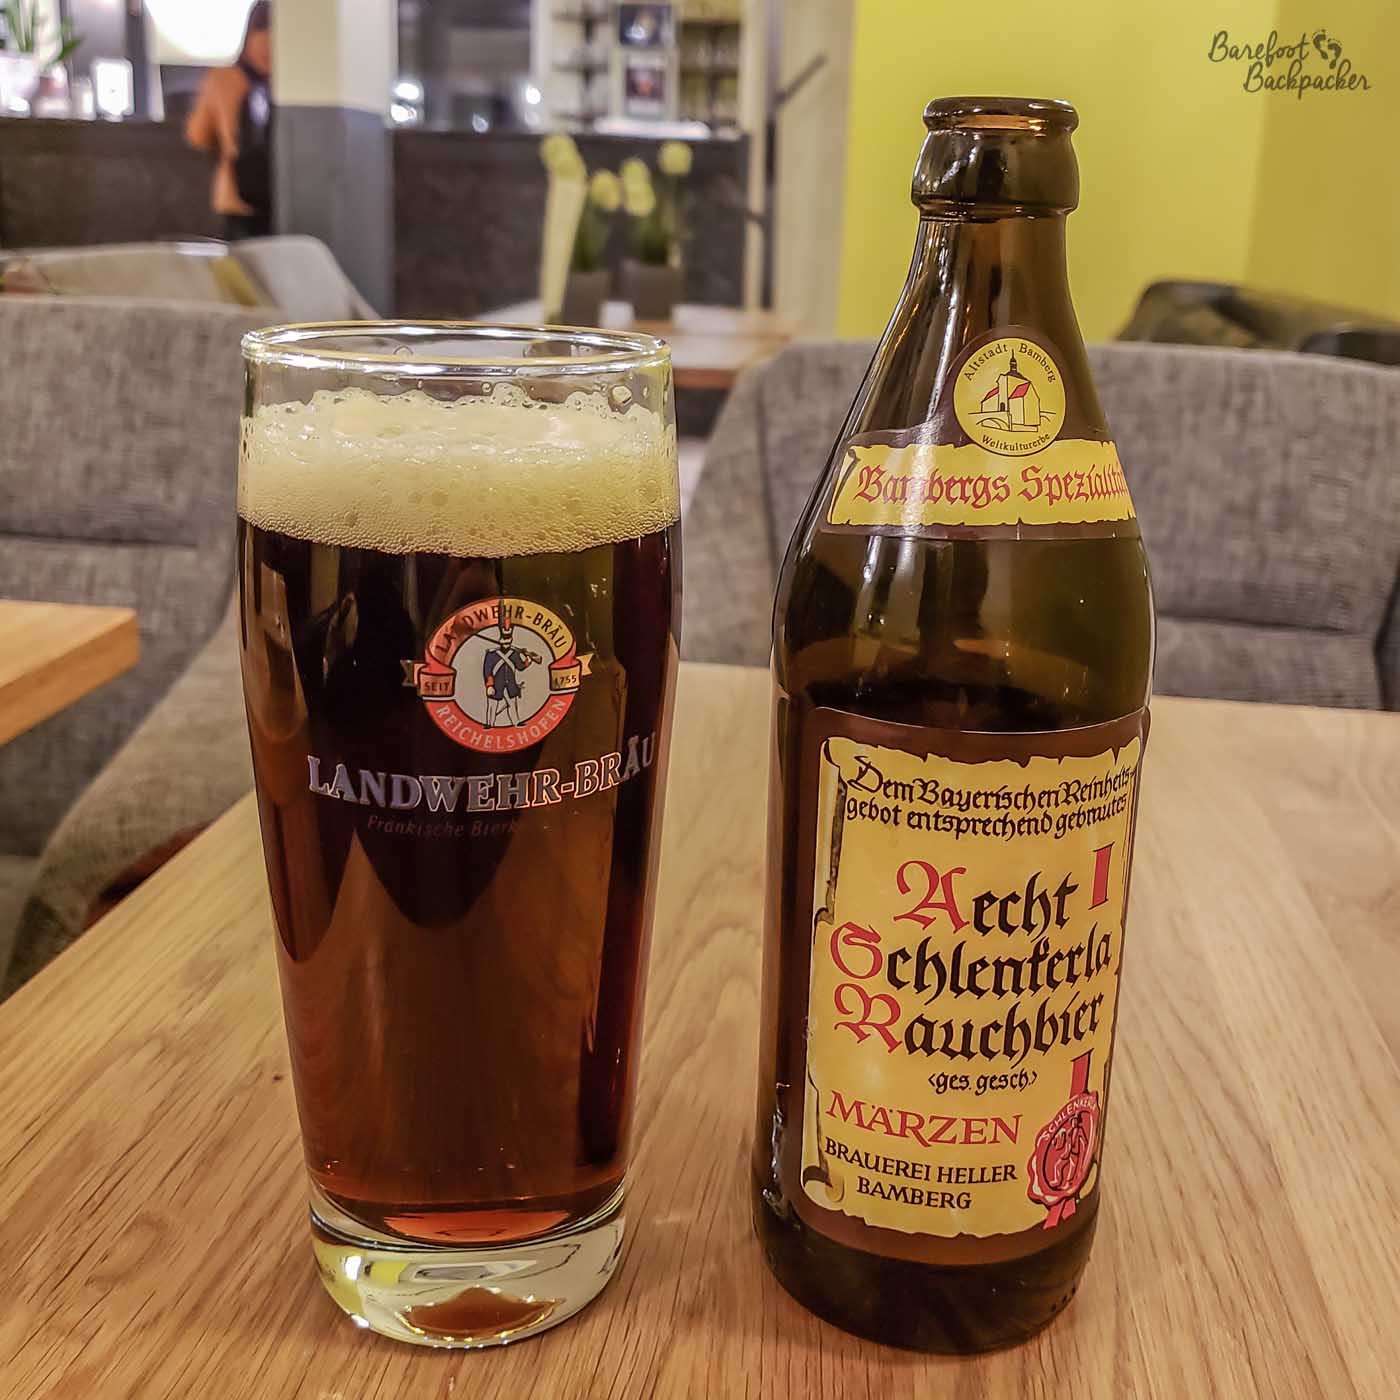 A bottle of beer stands on a table. To the left of it is a glass with the beer in. The beer is 'Aecht Schlenkerla Rauchbier' from Bamberg Brewery, Bavaria. The writing on the bottle is in an old-fashioned type script, as if it were written with a fountain pen or quill.